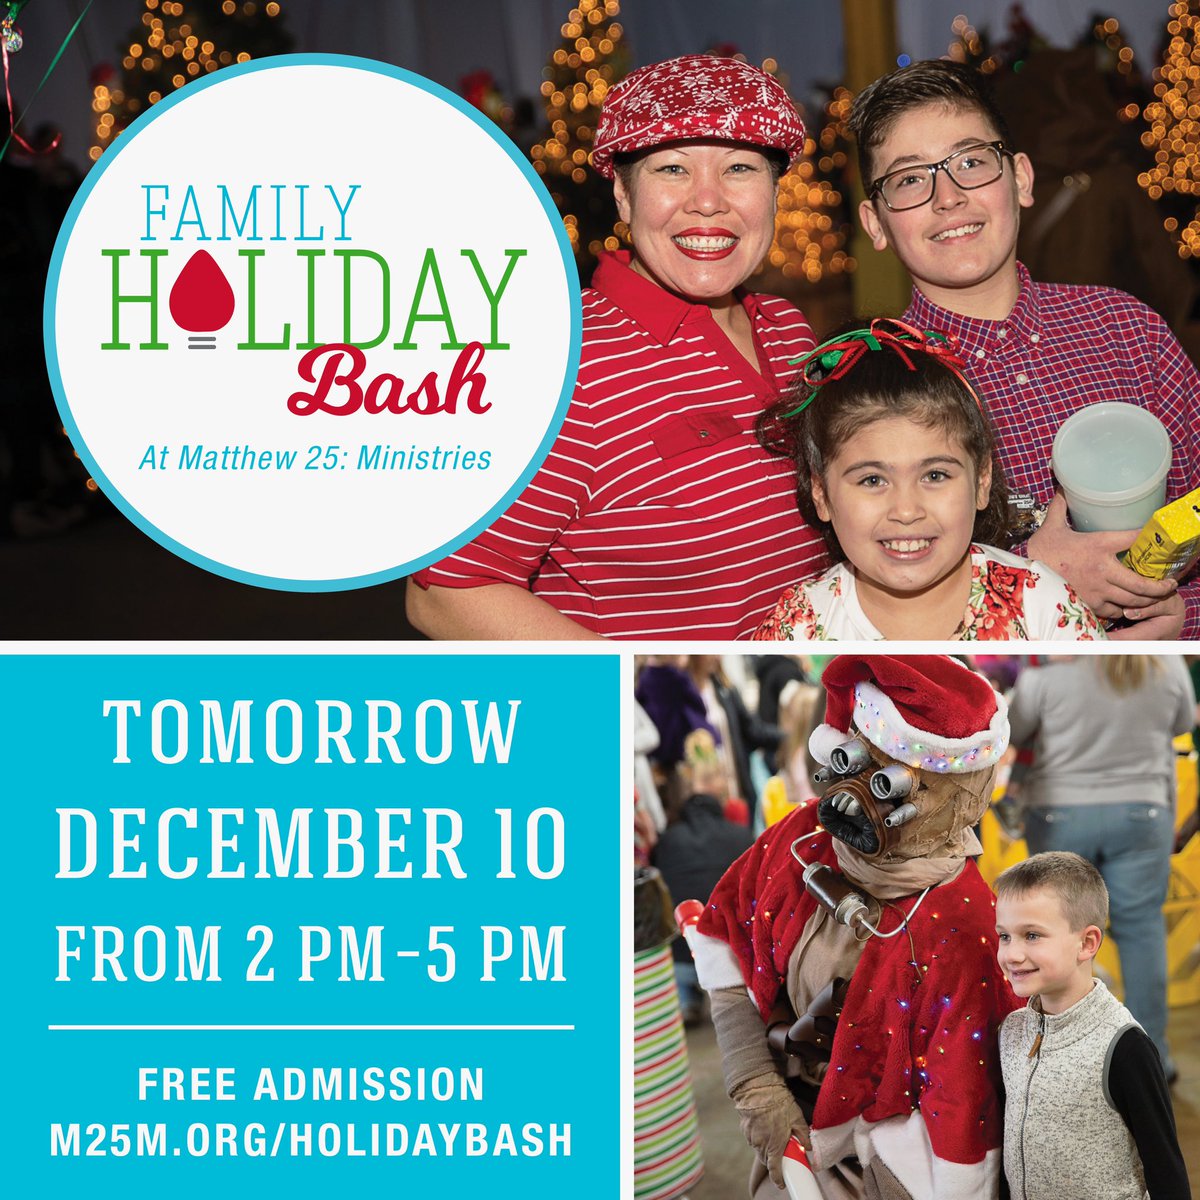 Come one, come all to our Family Holiday Bash at Matthew 25 tomorrow, 12/10 from 2 PM - 5 PM! Our facility has been transformed into a winter wonderland. More details at m25m.org/holidaybash. Admission is FREE, with donations being accepted to benefit A Kid Again's work.